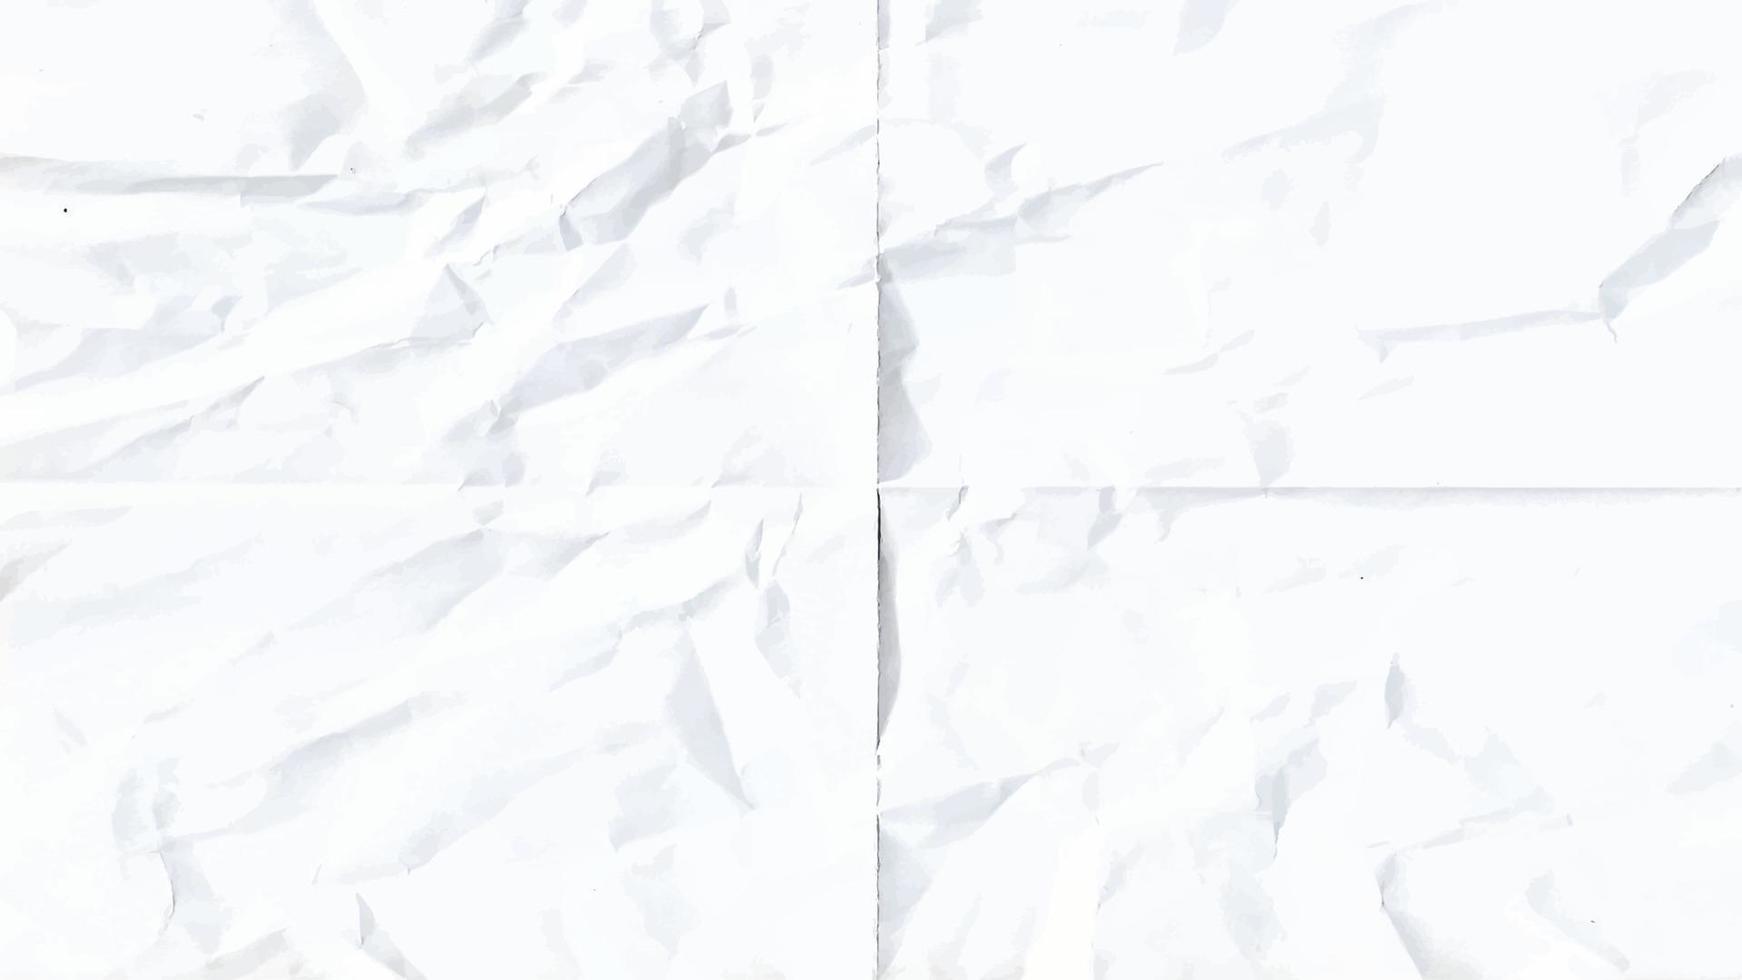 Crumpled white paper texture with fold marks vector